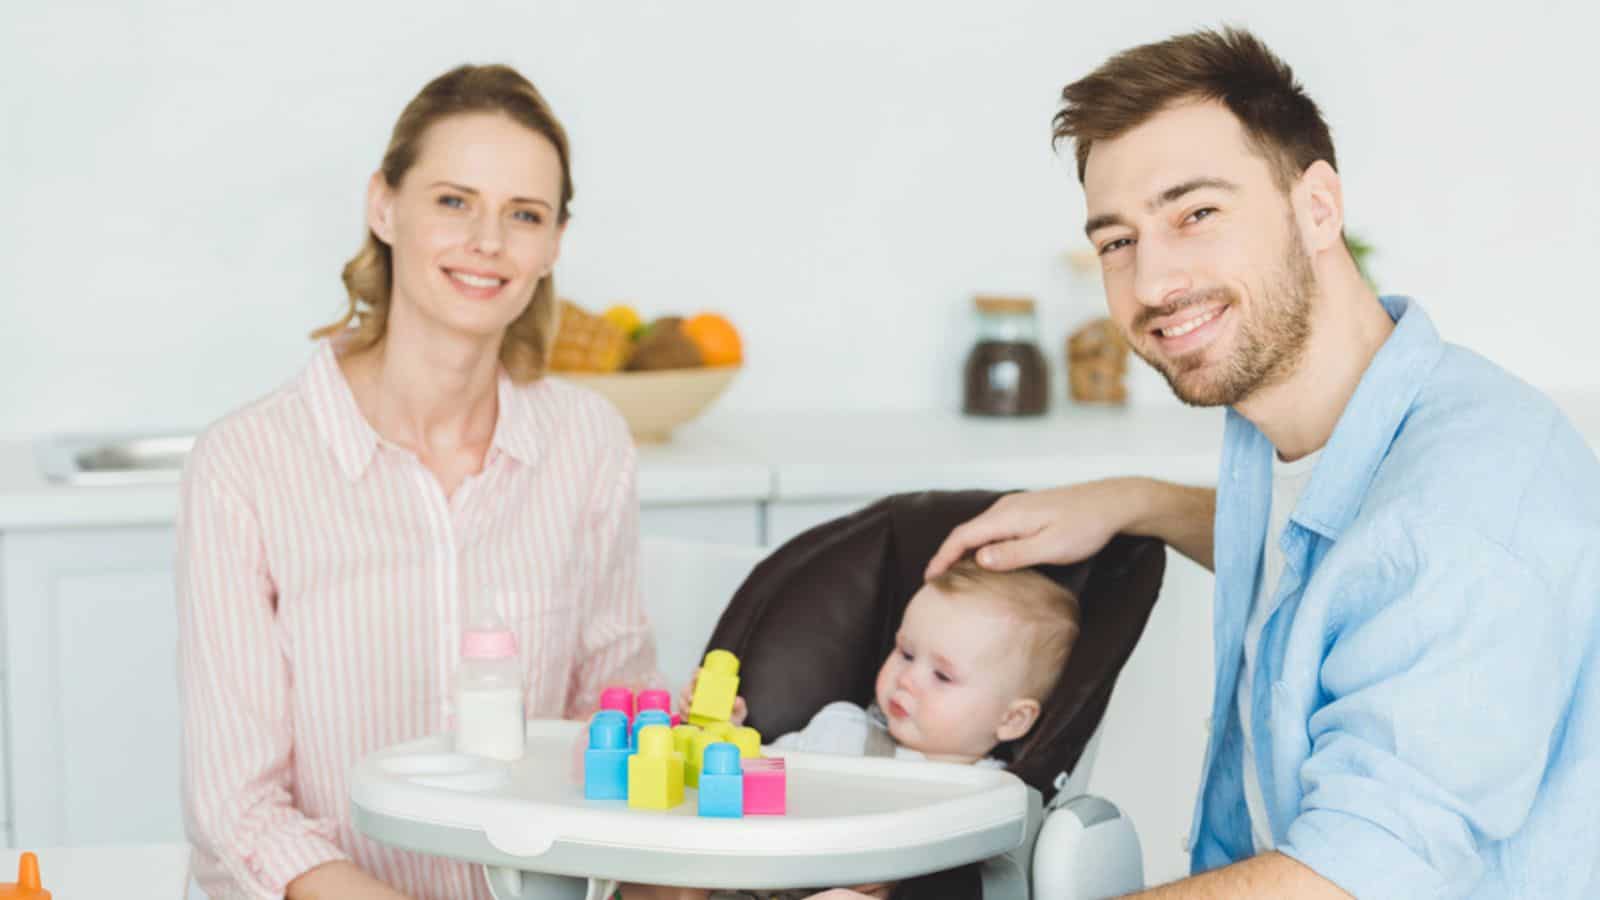 Young parents with infant daughter sitting in baby chair with plastic blocks and feeding bottle